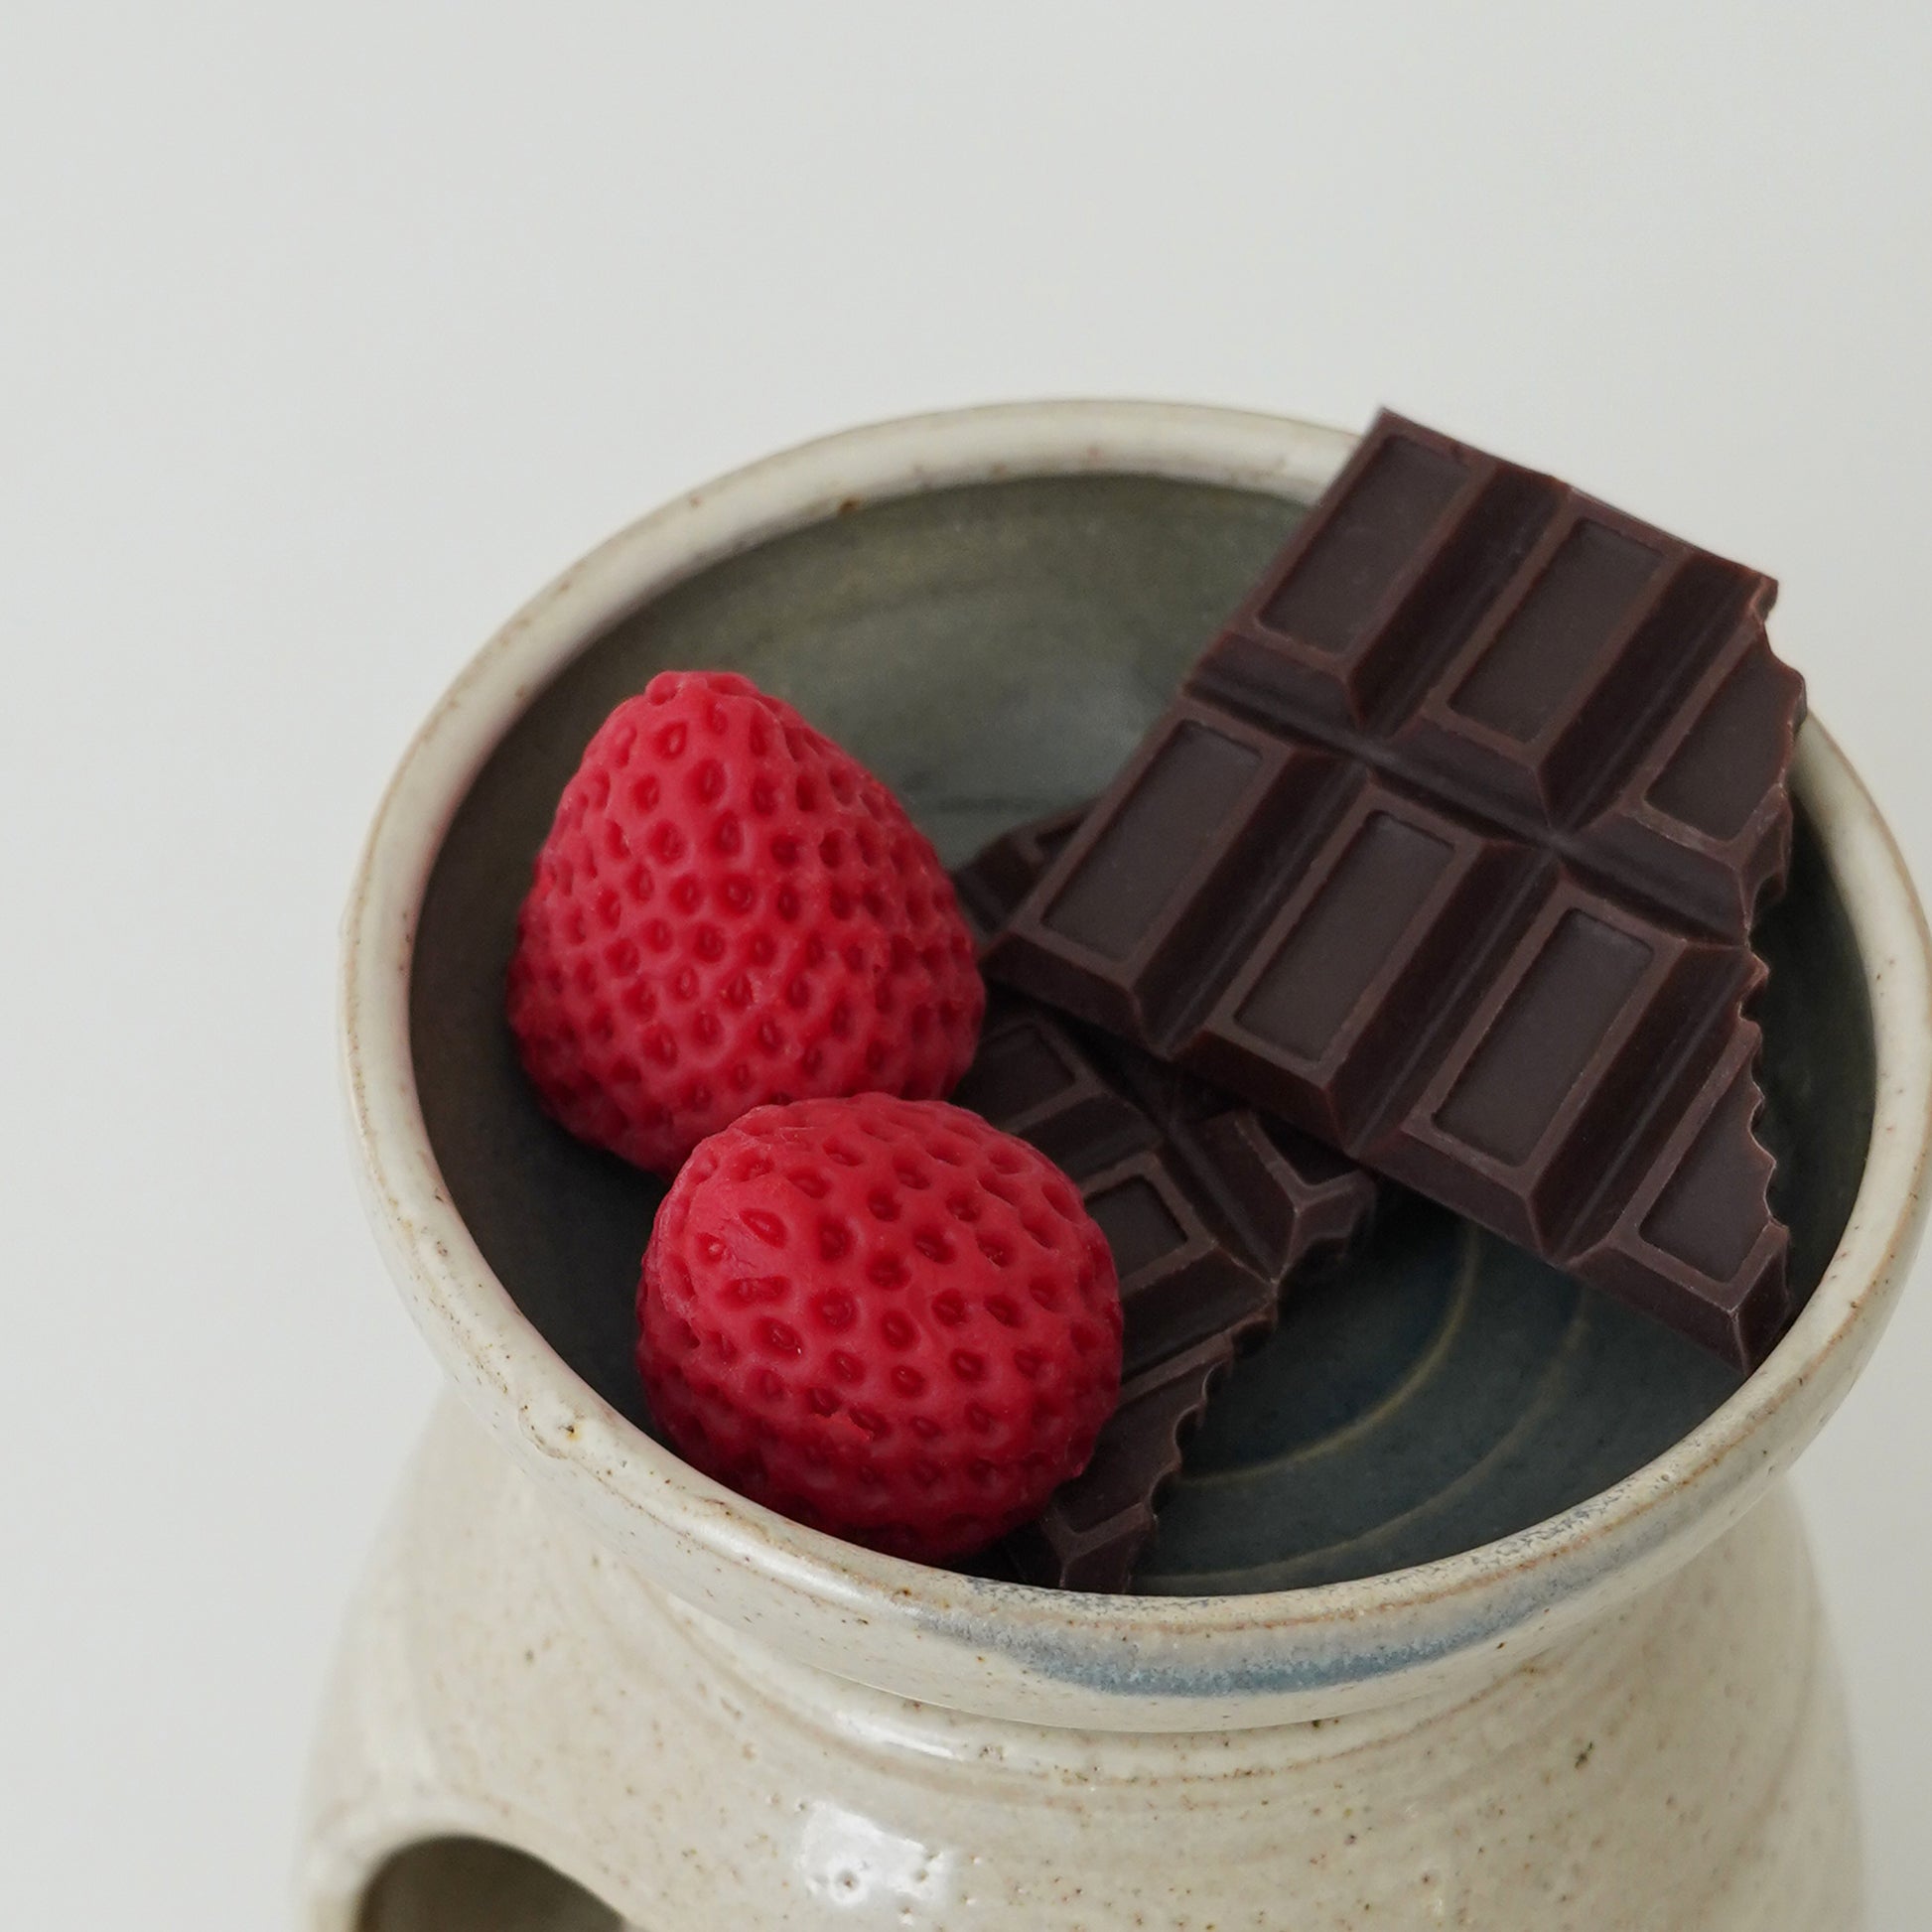 chocolate and strawberry wax melts in a wax warmer